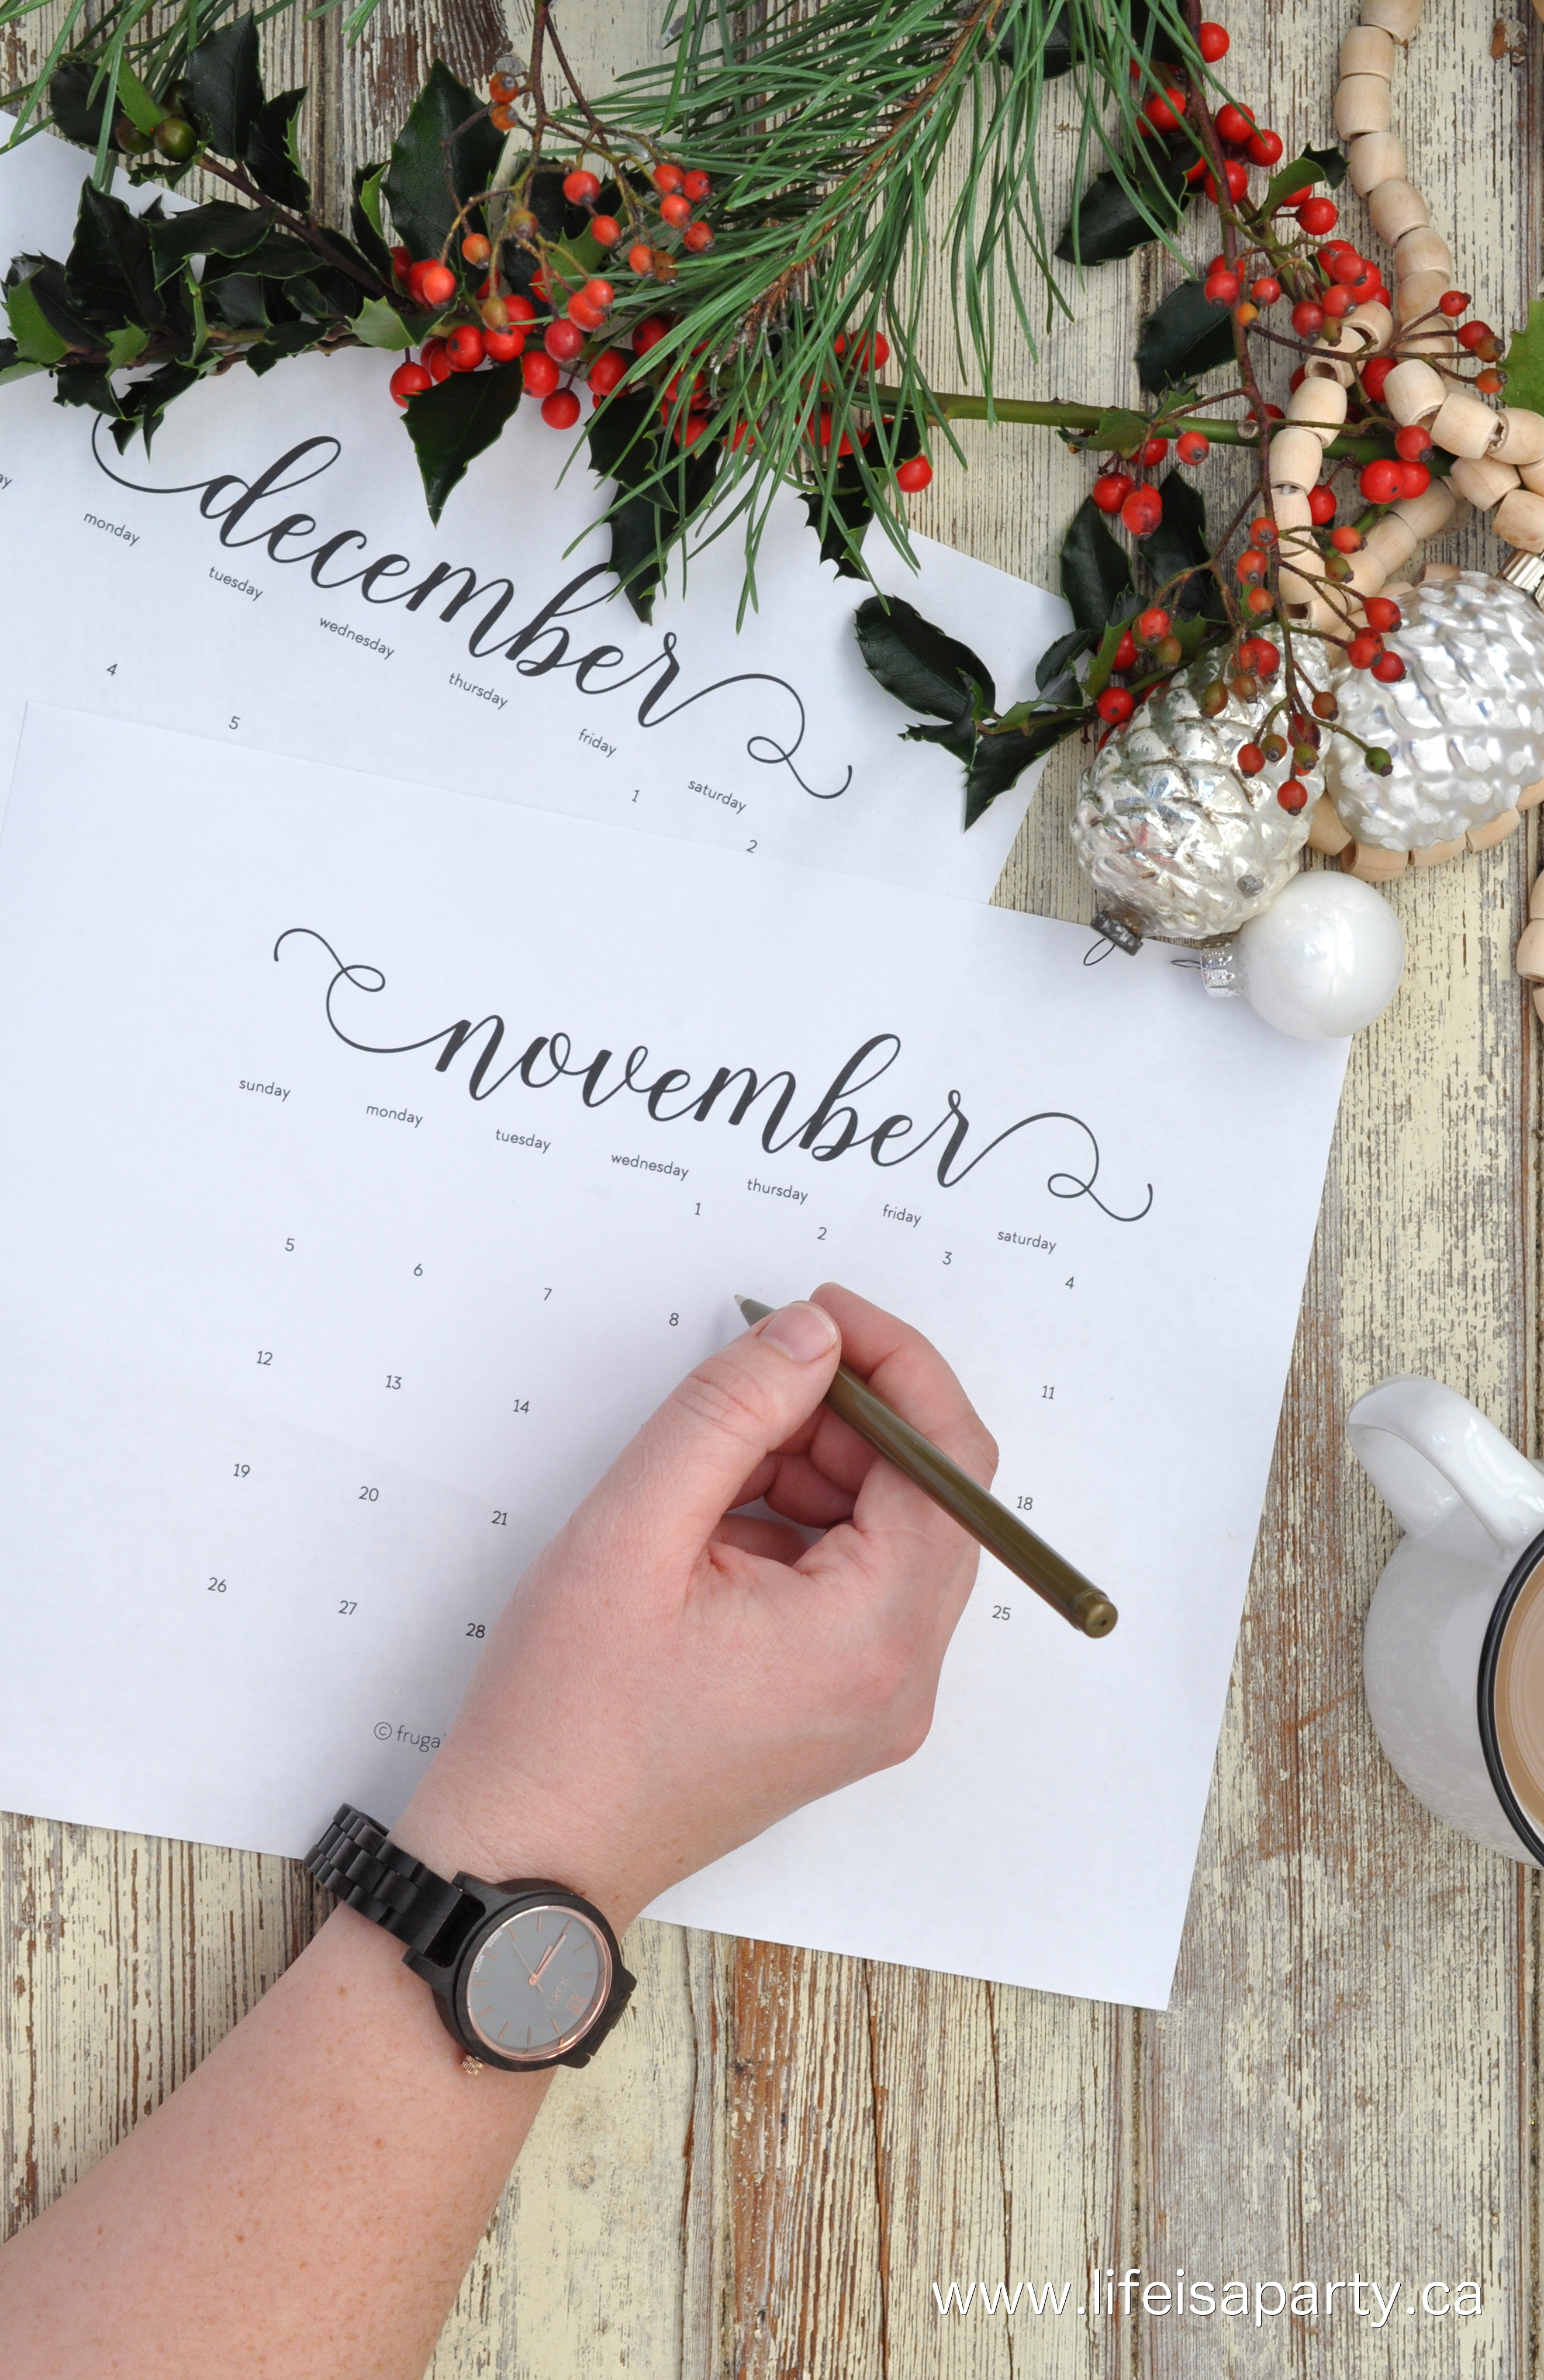 November is for getting ready for Christmas and December is for celebrating Christmas -your guide to getting ready early this year!